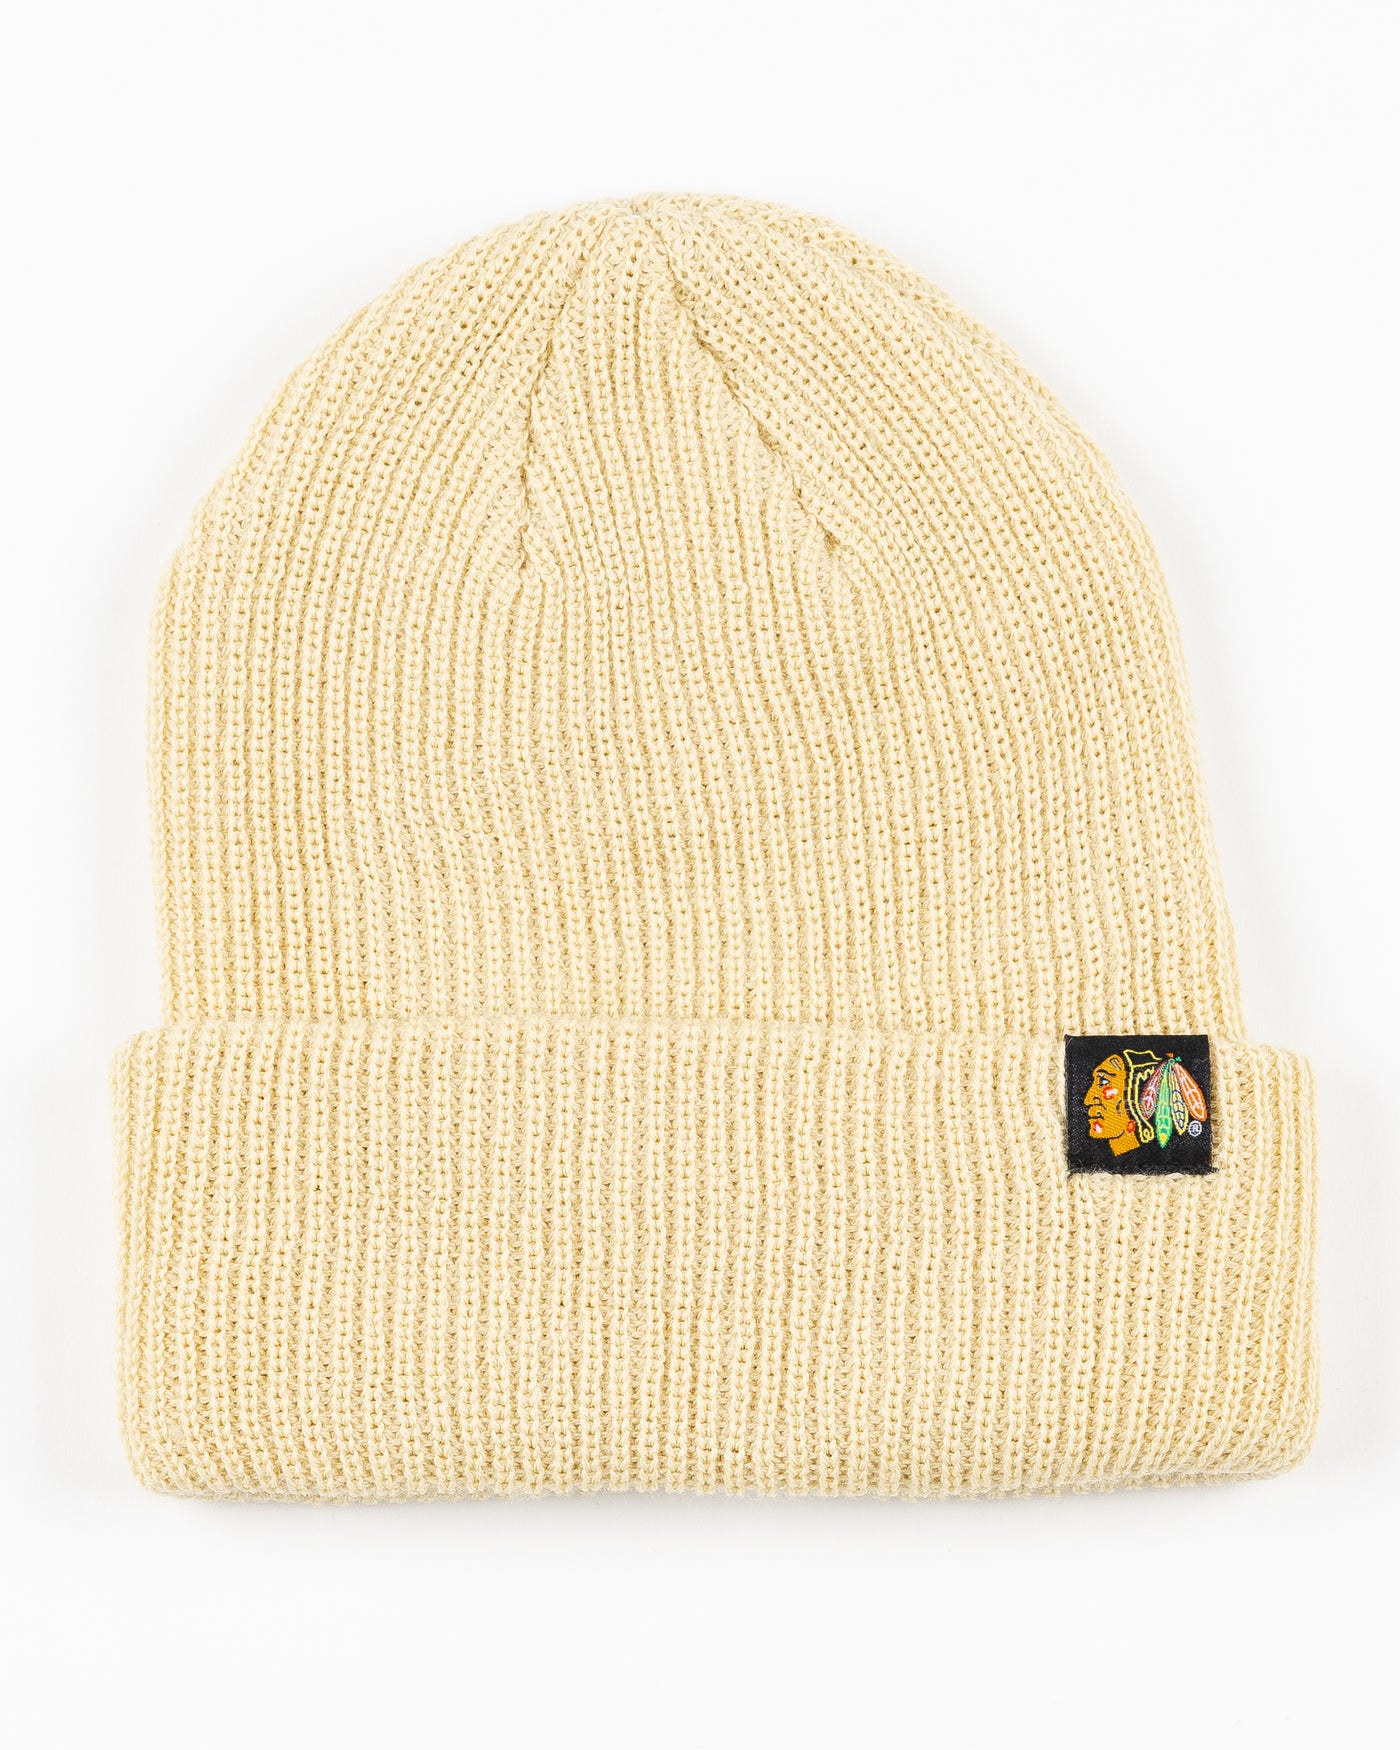 cream colored Sportiqe knit beanie with Chicago Blackhawks primary logo patch stitched on front cuff - front lay flat